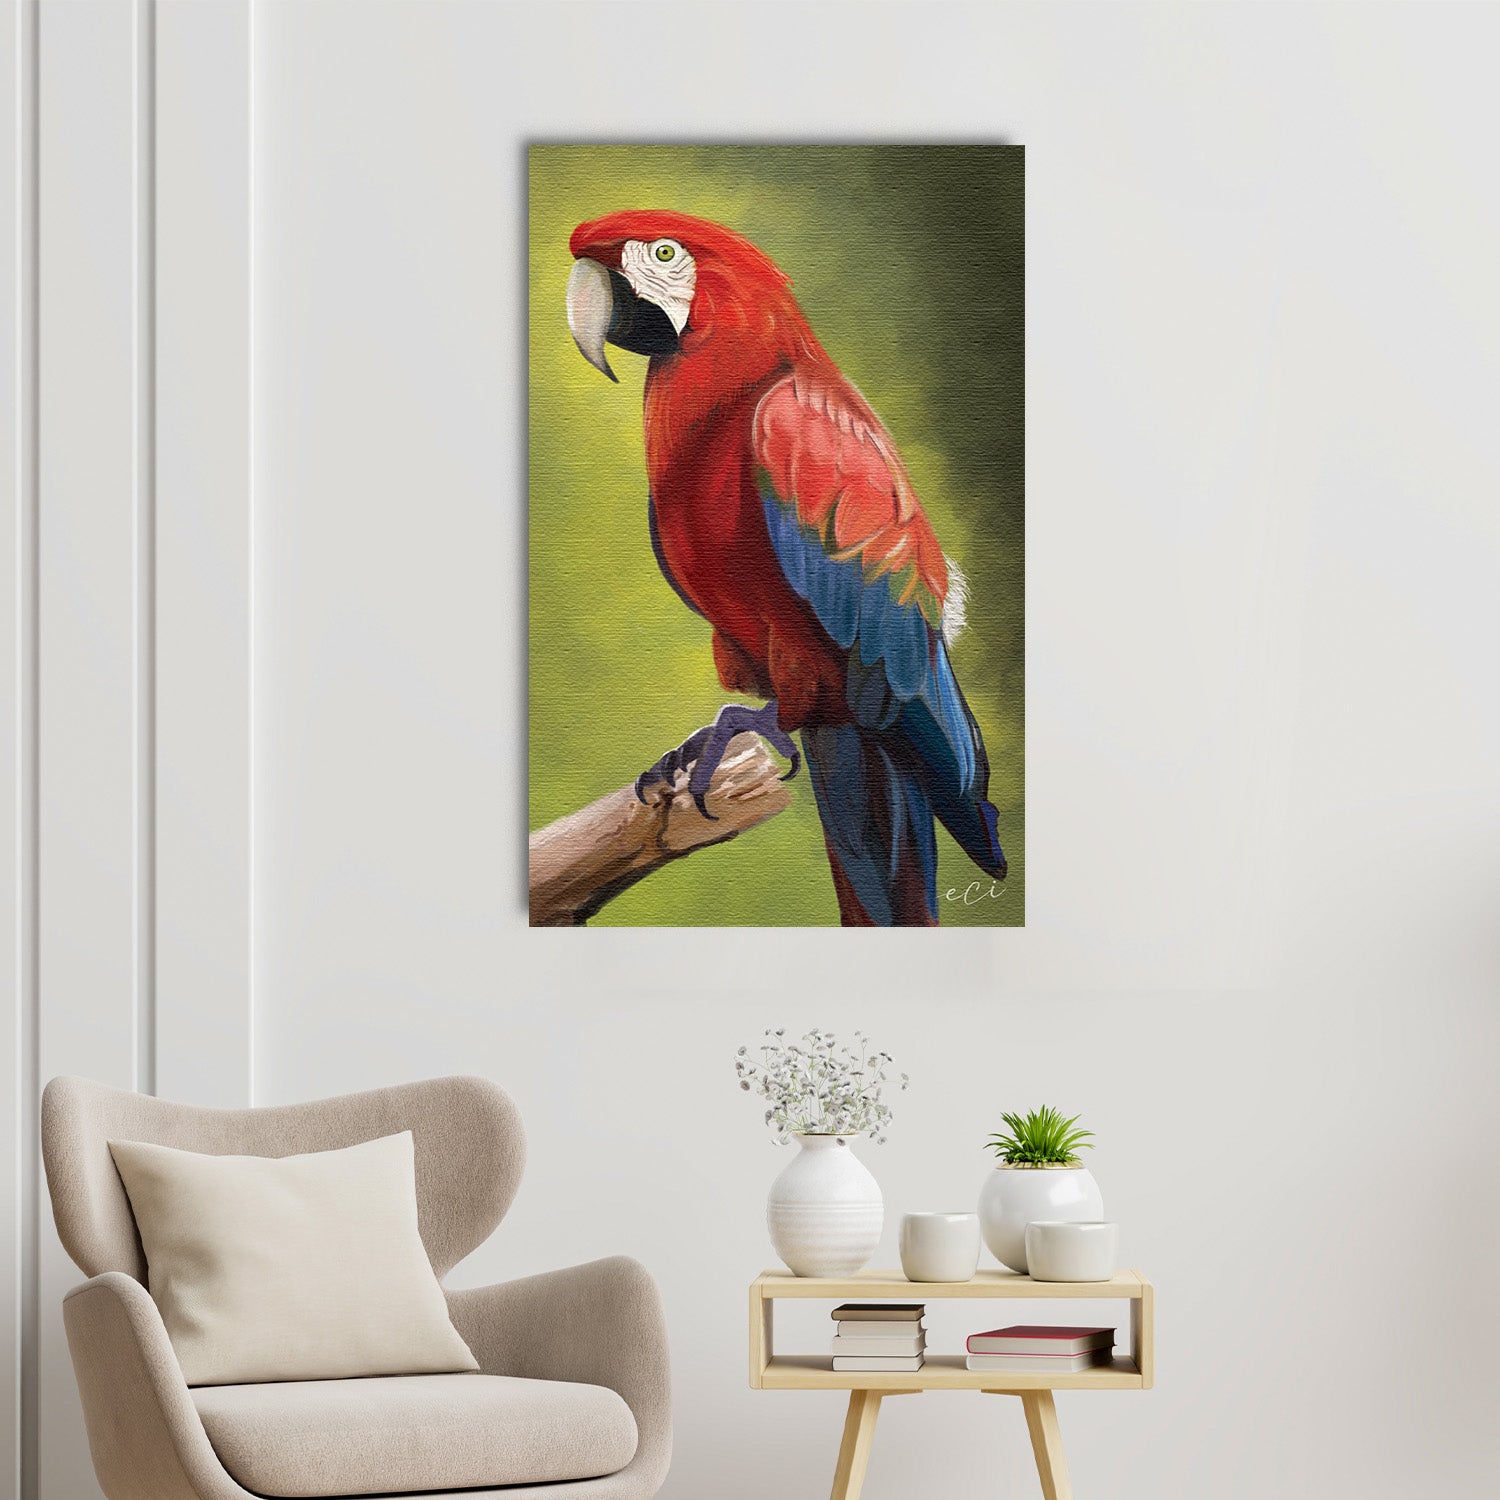 Parrot On Tree Branch Canvas Painting Digital Printed Bird Wall Art